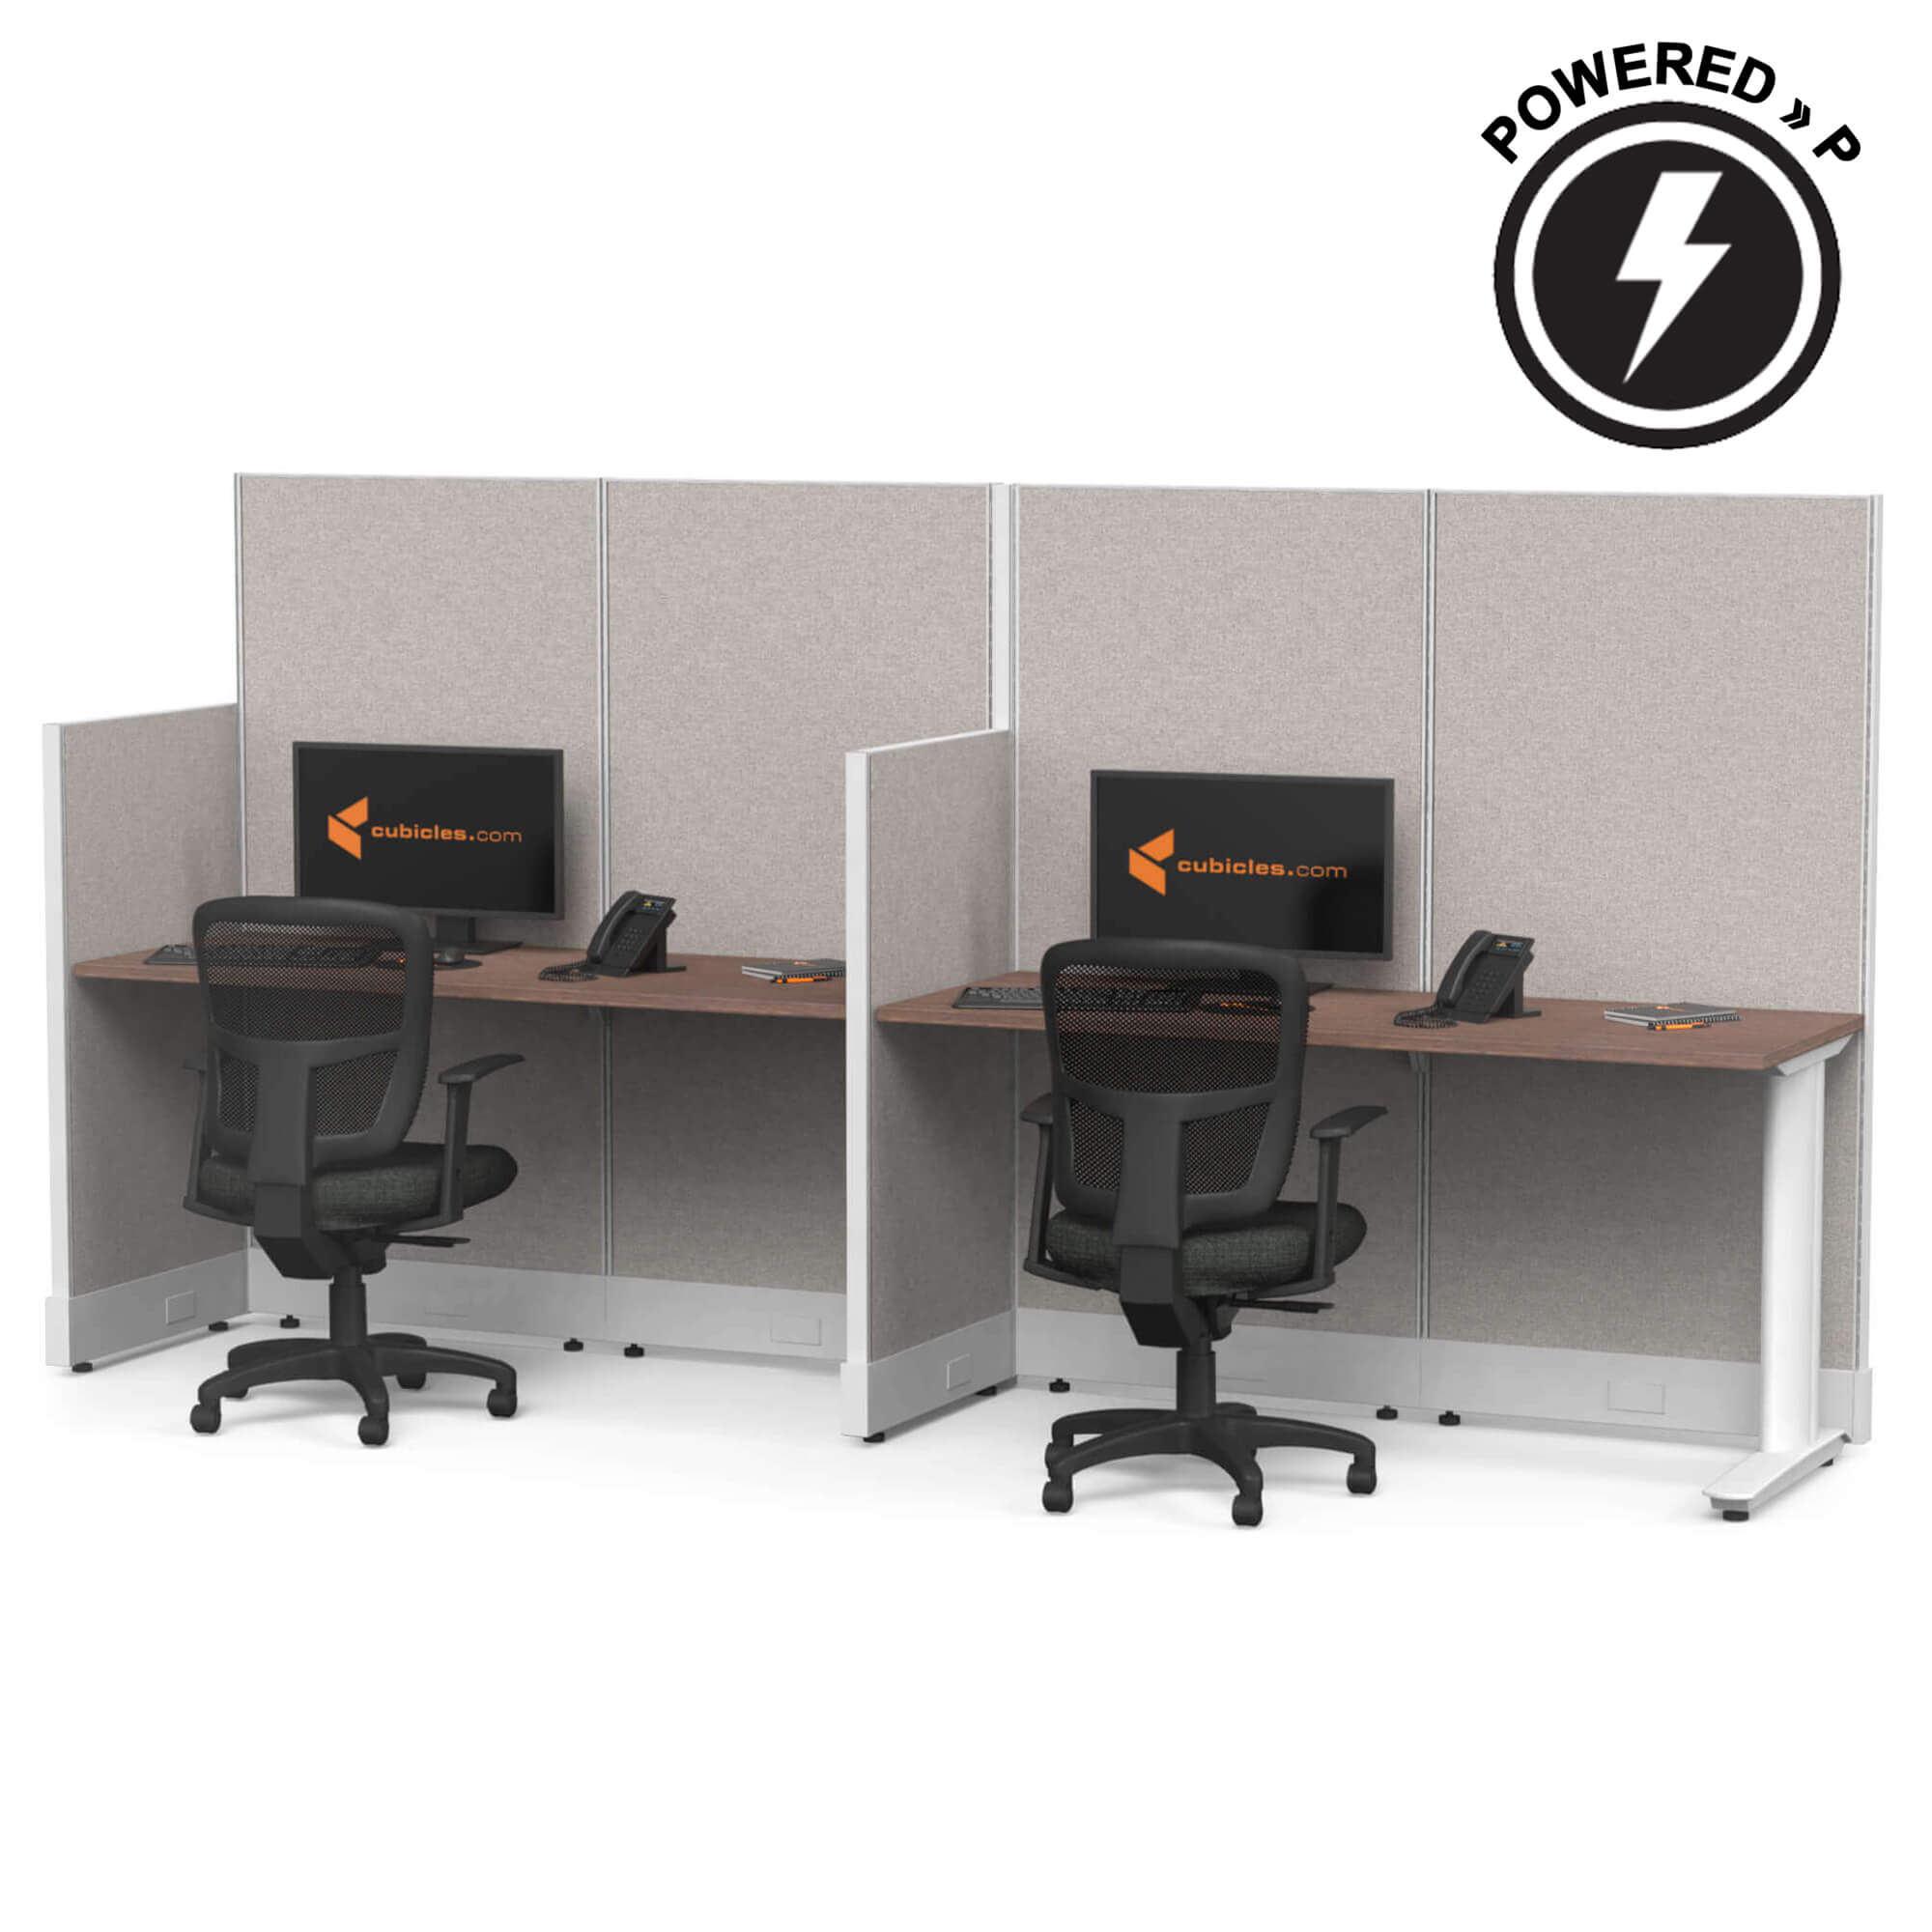 cubicle-desk-straight-workstation-2pack-inline-powered-sign-1-2.jpg